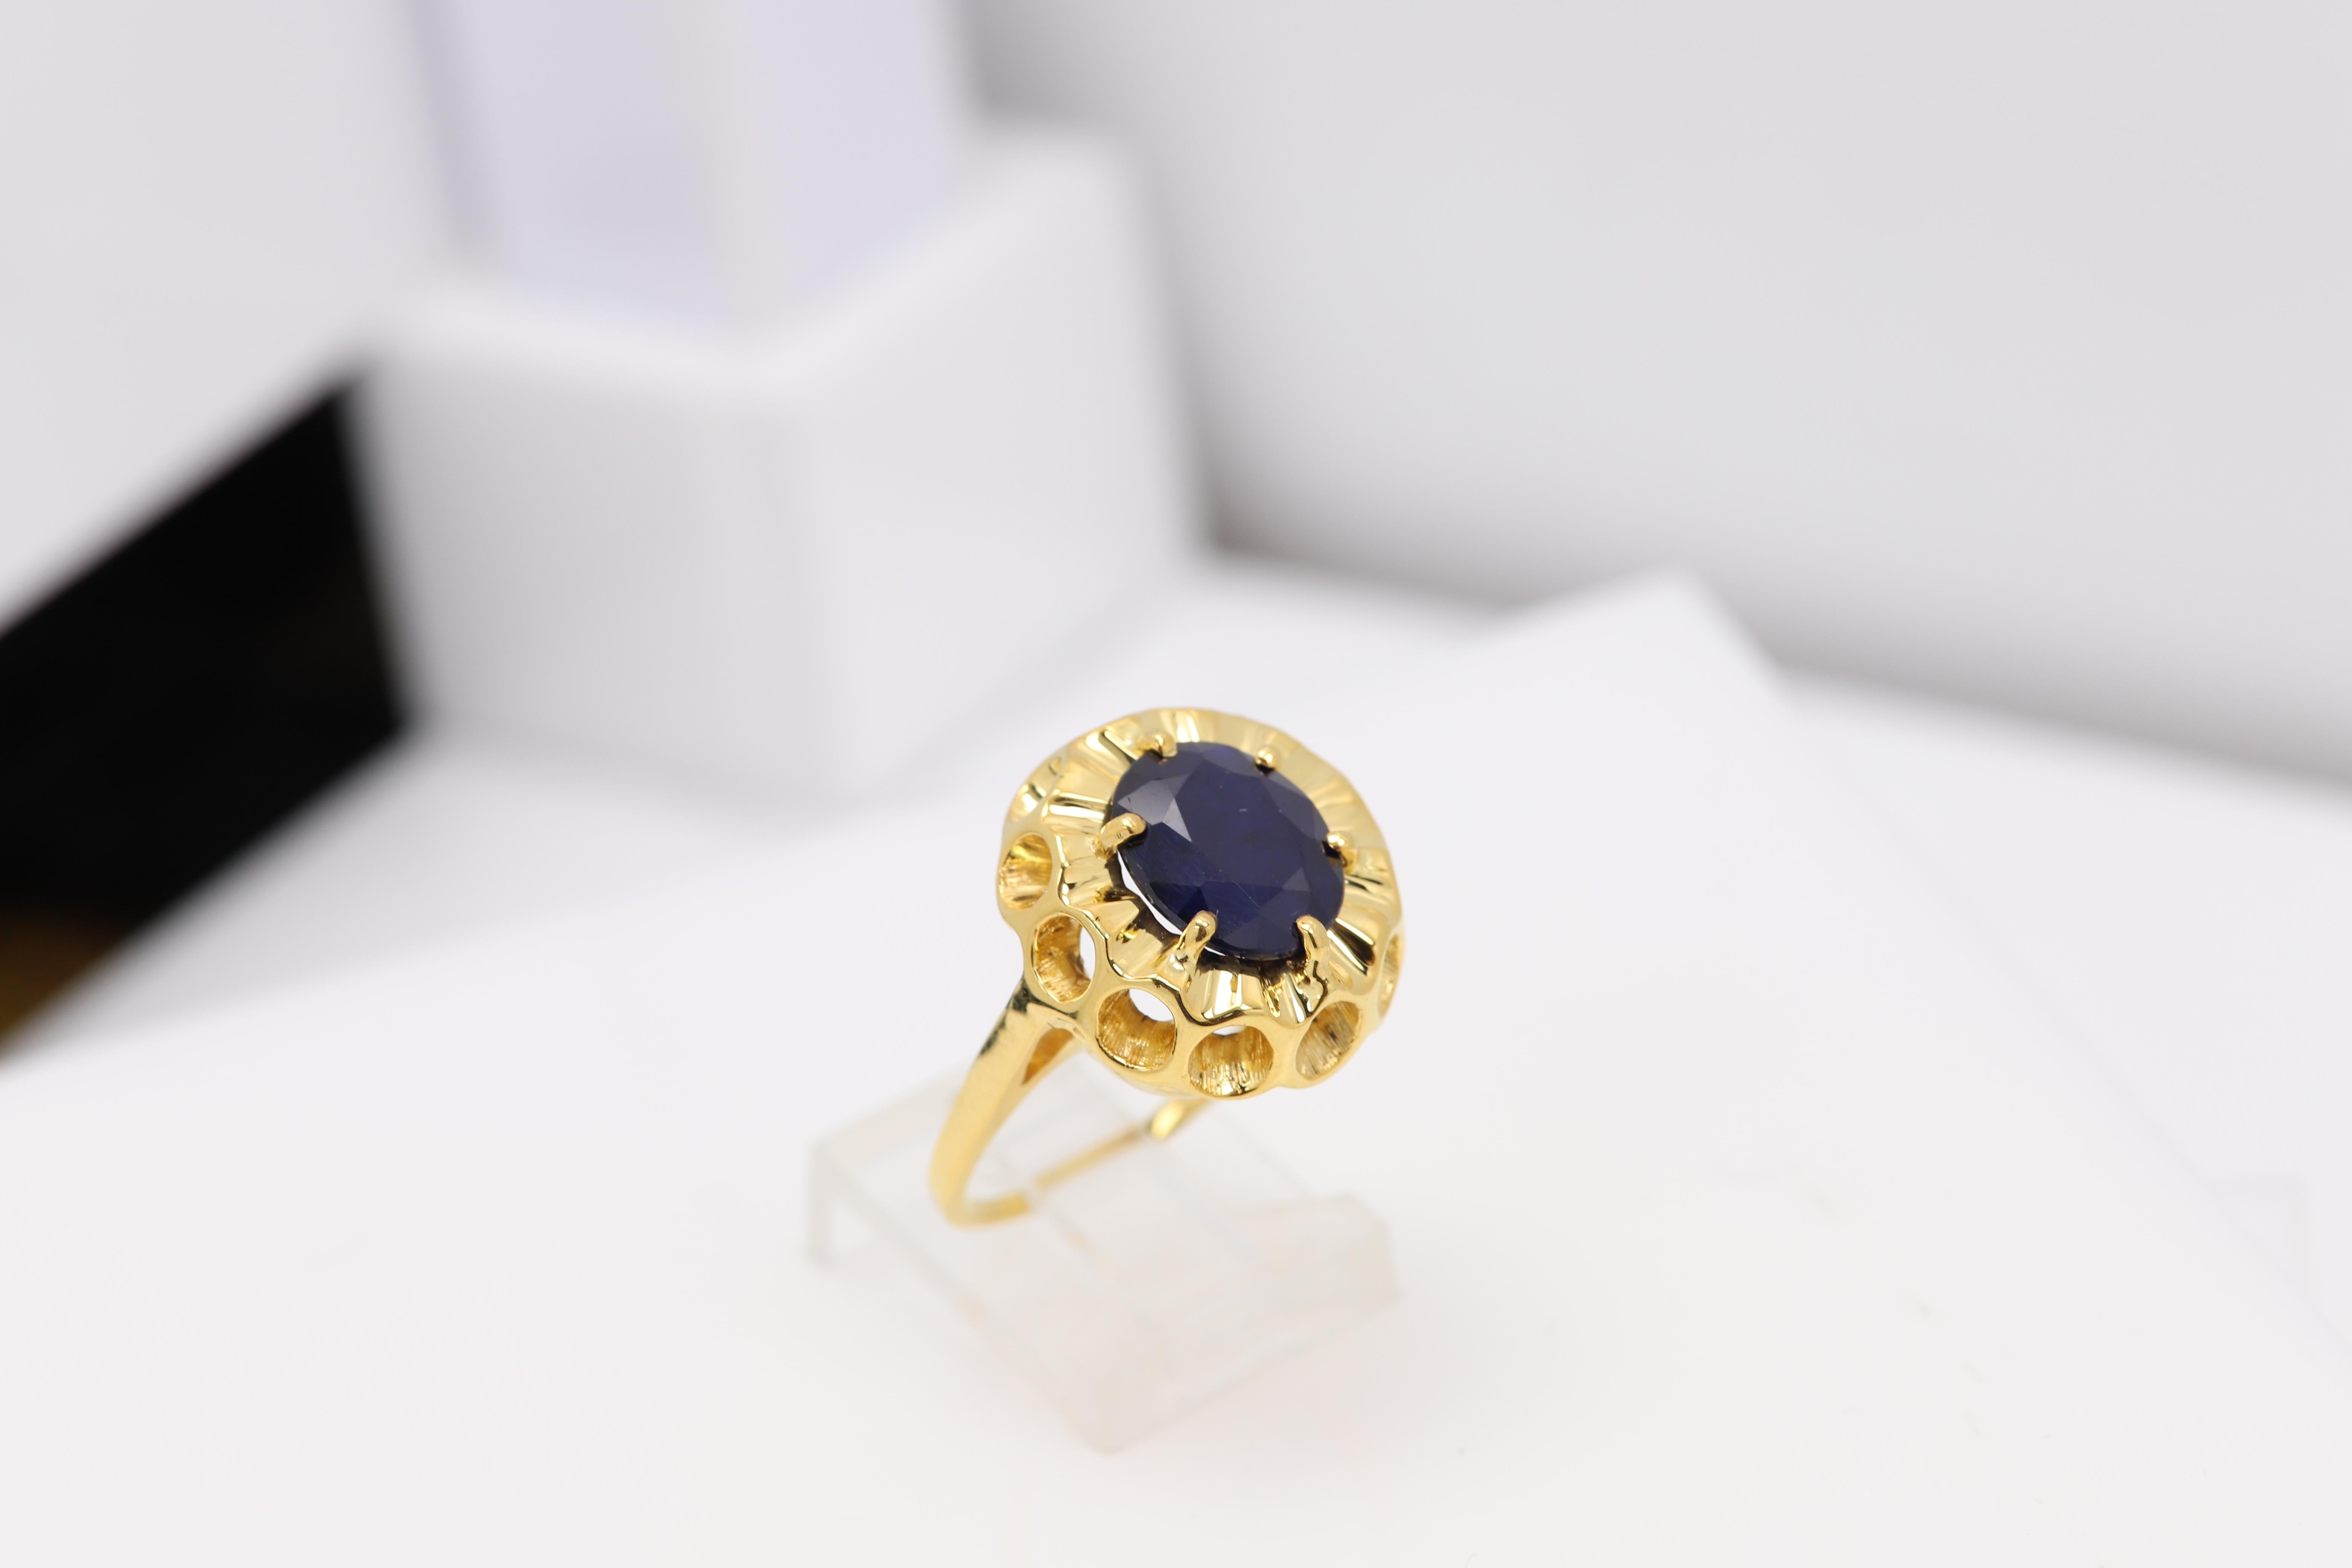 Vintage Large Oval Sapphire Ring 14 Karat Yellow Gold Circa 1940's For Sale 3